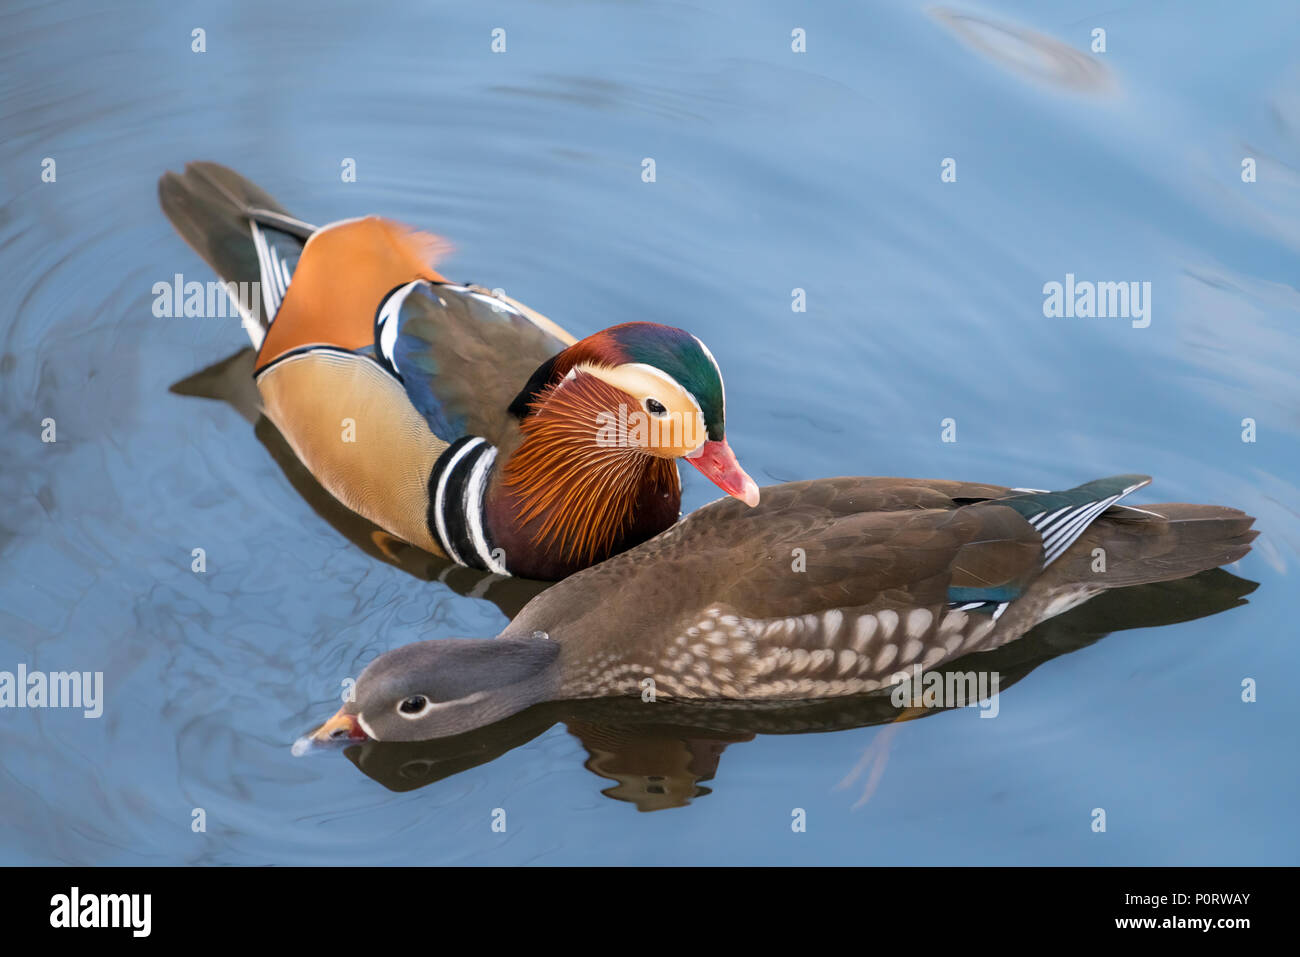 Closeup male mandarin duck Aix galericulata swimming on the water with reflection, a beautiful bird living in the wild Stock Photo